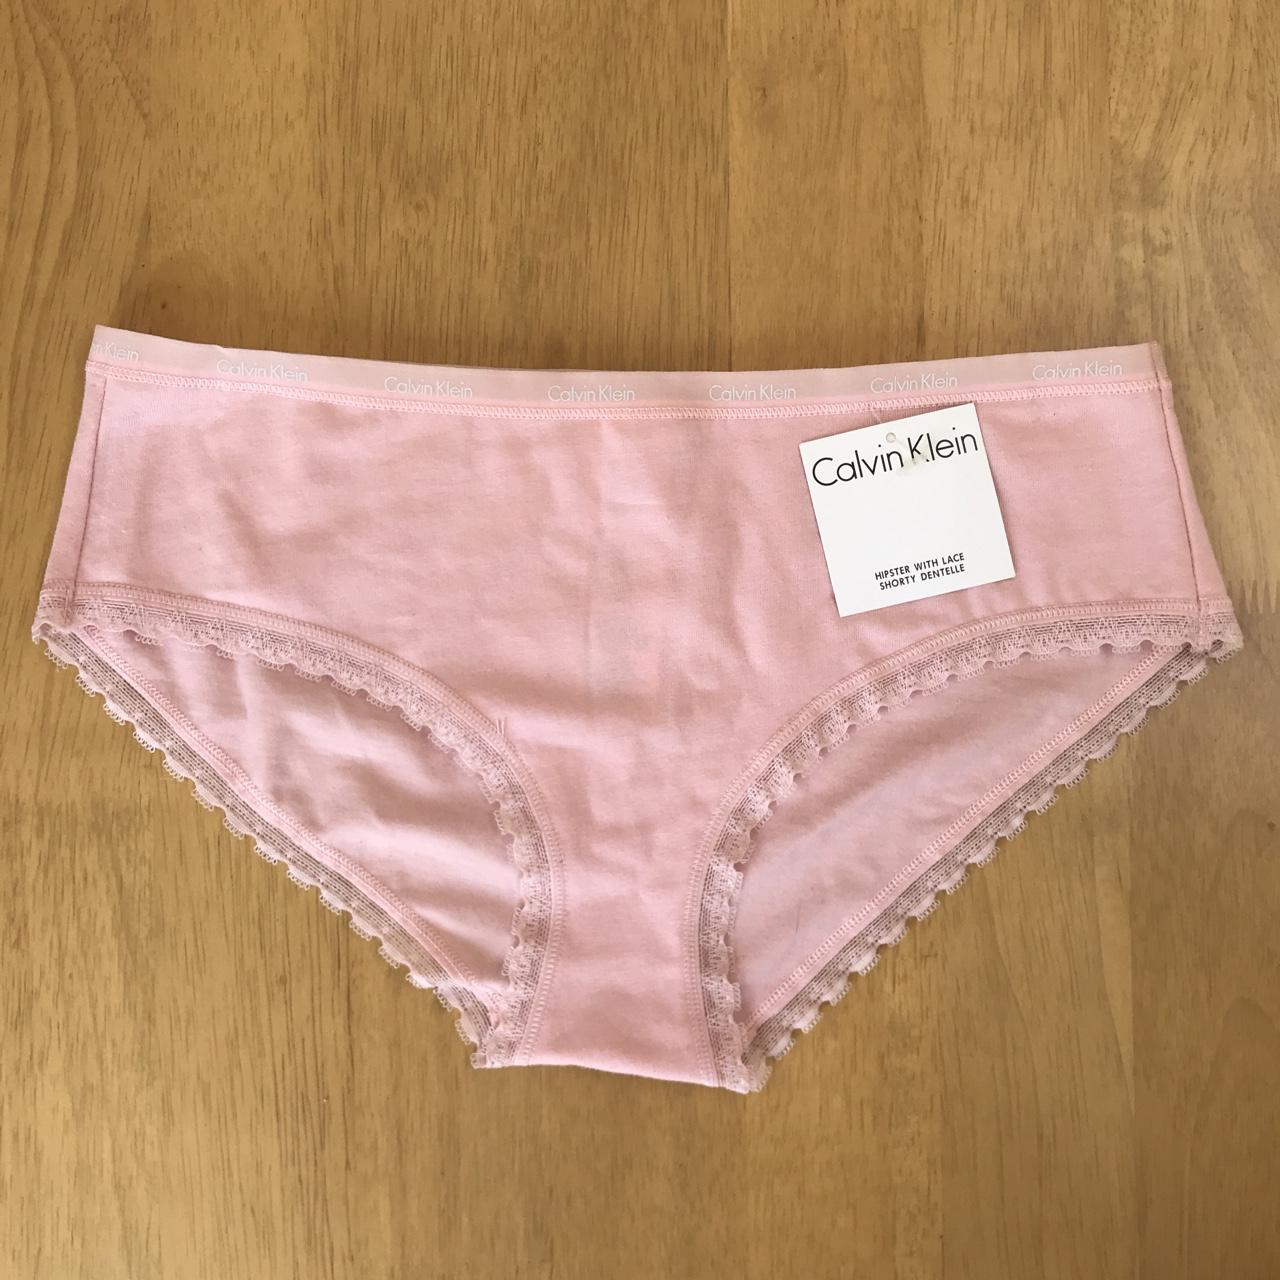 Calvin Klein Underwear - Size Small - New with tags - Depop